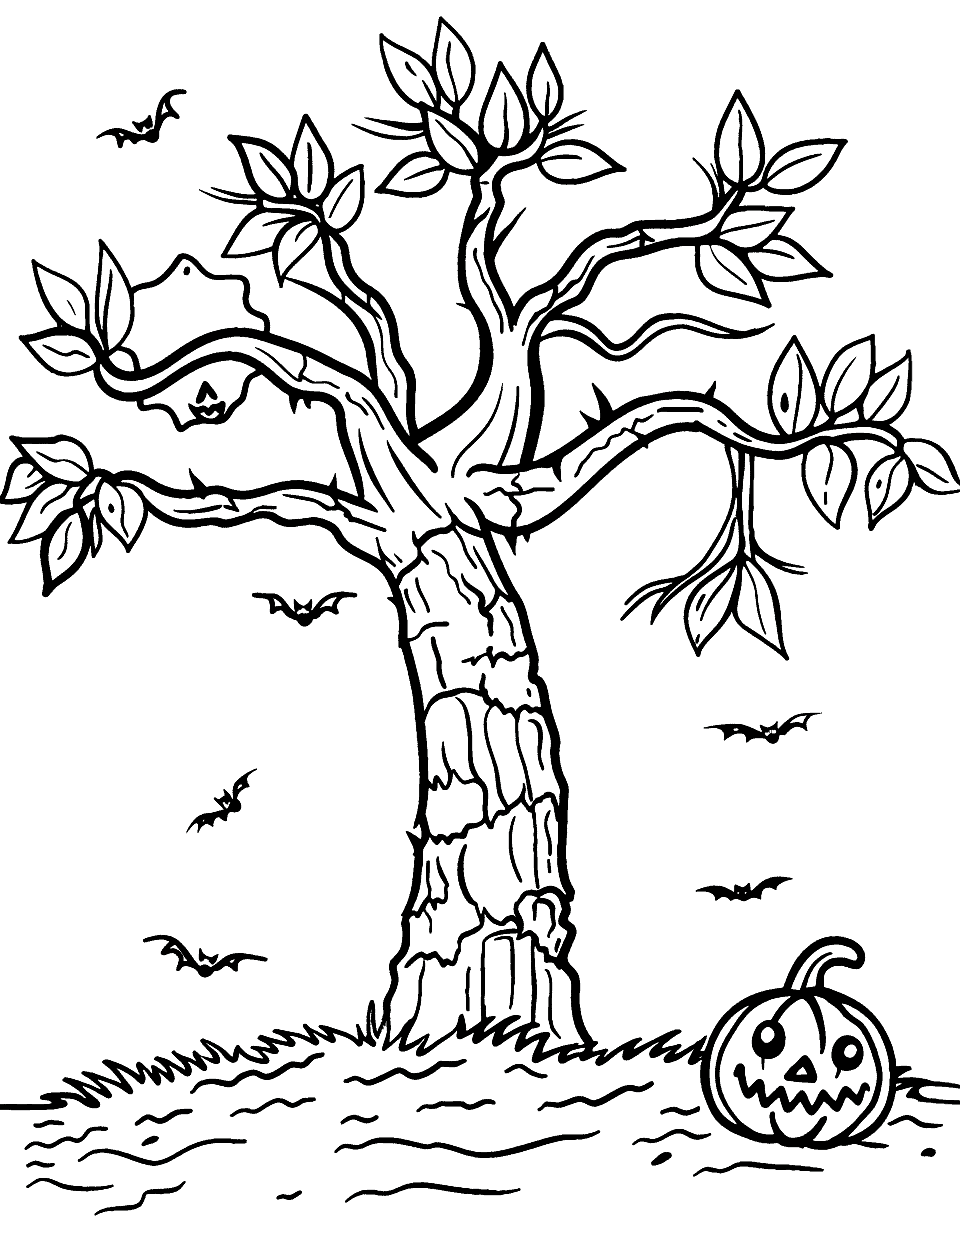 Spooky Halloween Tree Coloring Page - A bare tree with a few leaves, perfect for a Halloween scene.